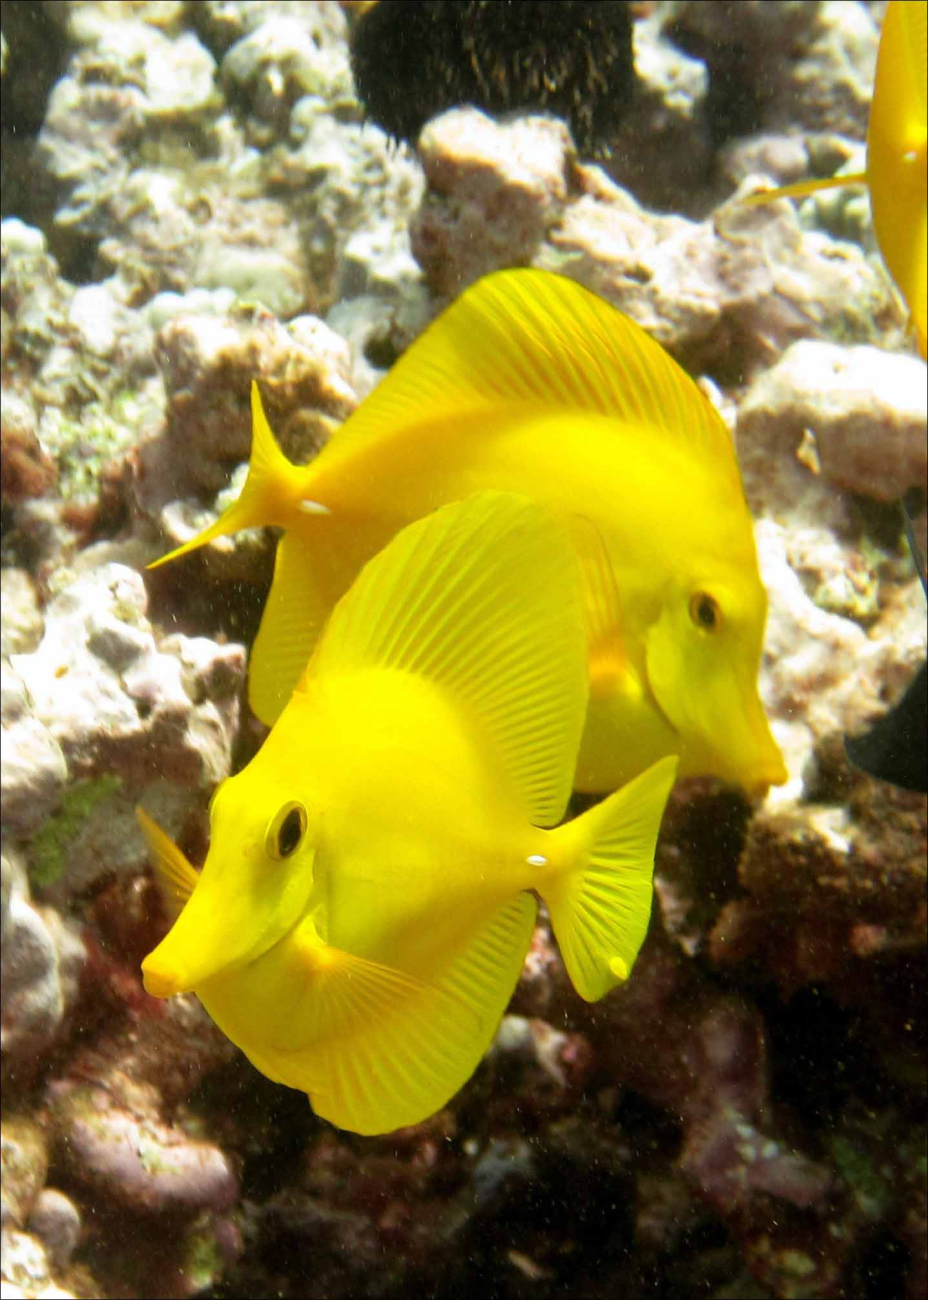 The yellow tang (Zebrasoma flavescens) is an example  of the fishes protected in the Kahekili Herbivore Fisheries Management Area